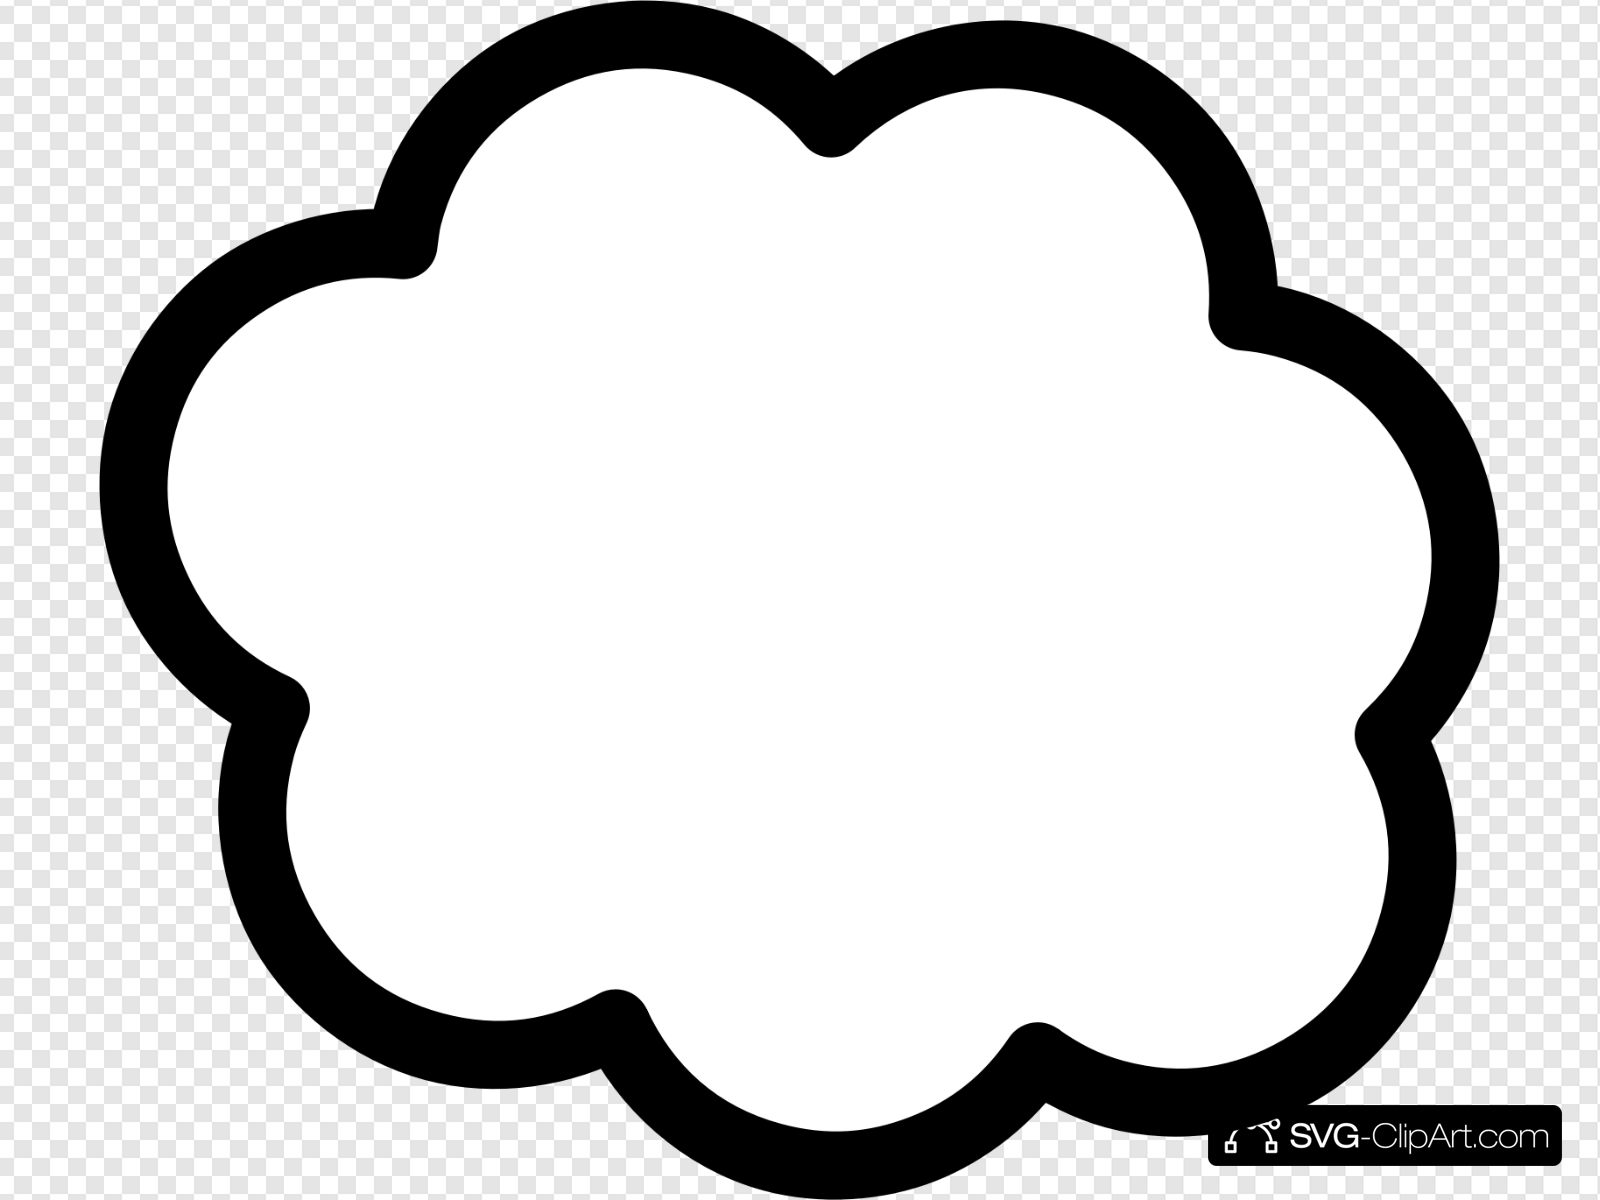 Simple Cloud Outline Clip art, Icon and SVG